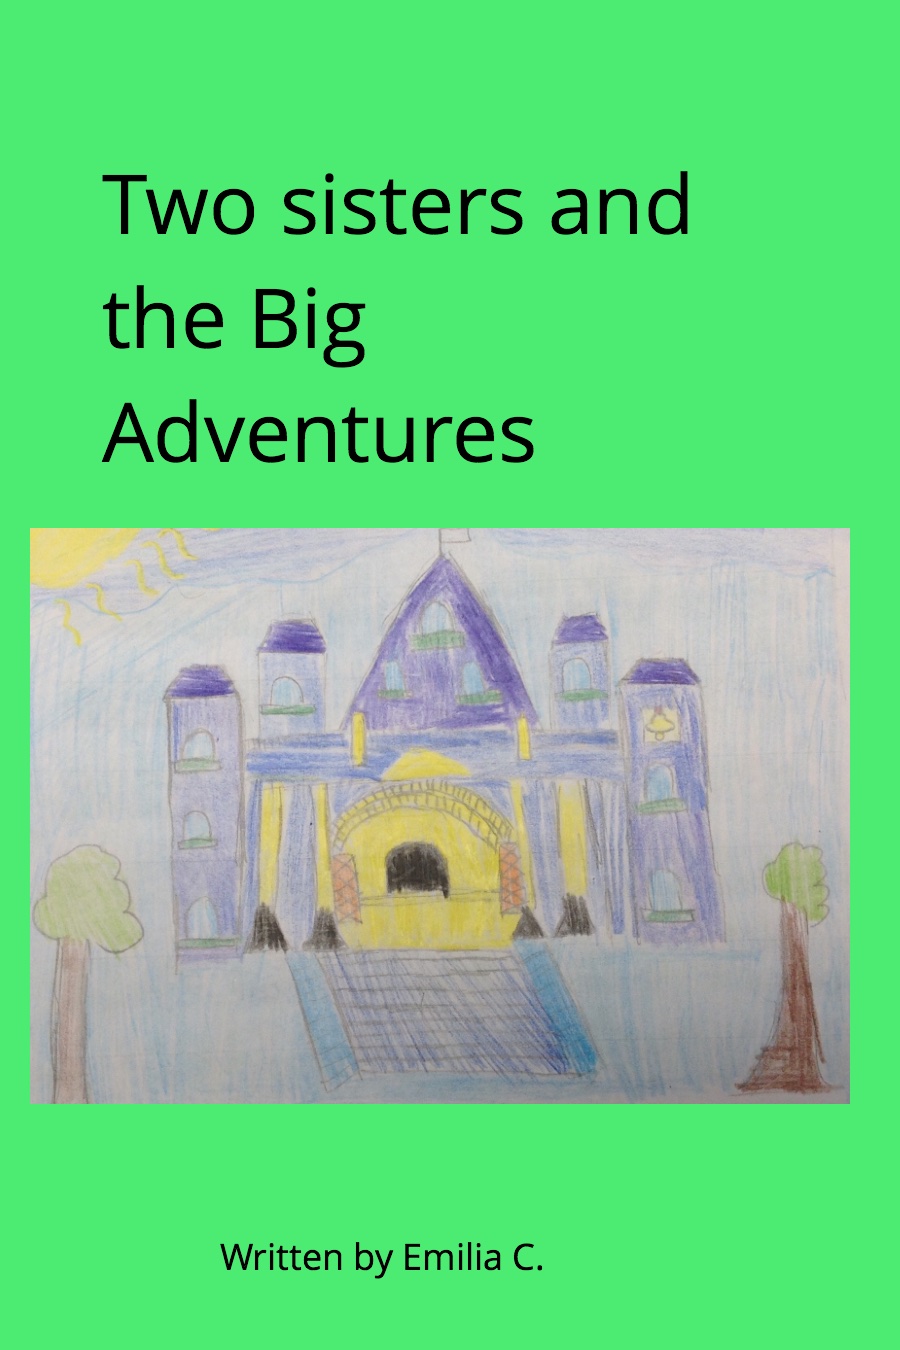 Two Sisters and the Big Adventure by Emilia C